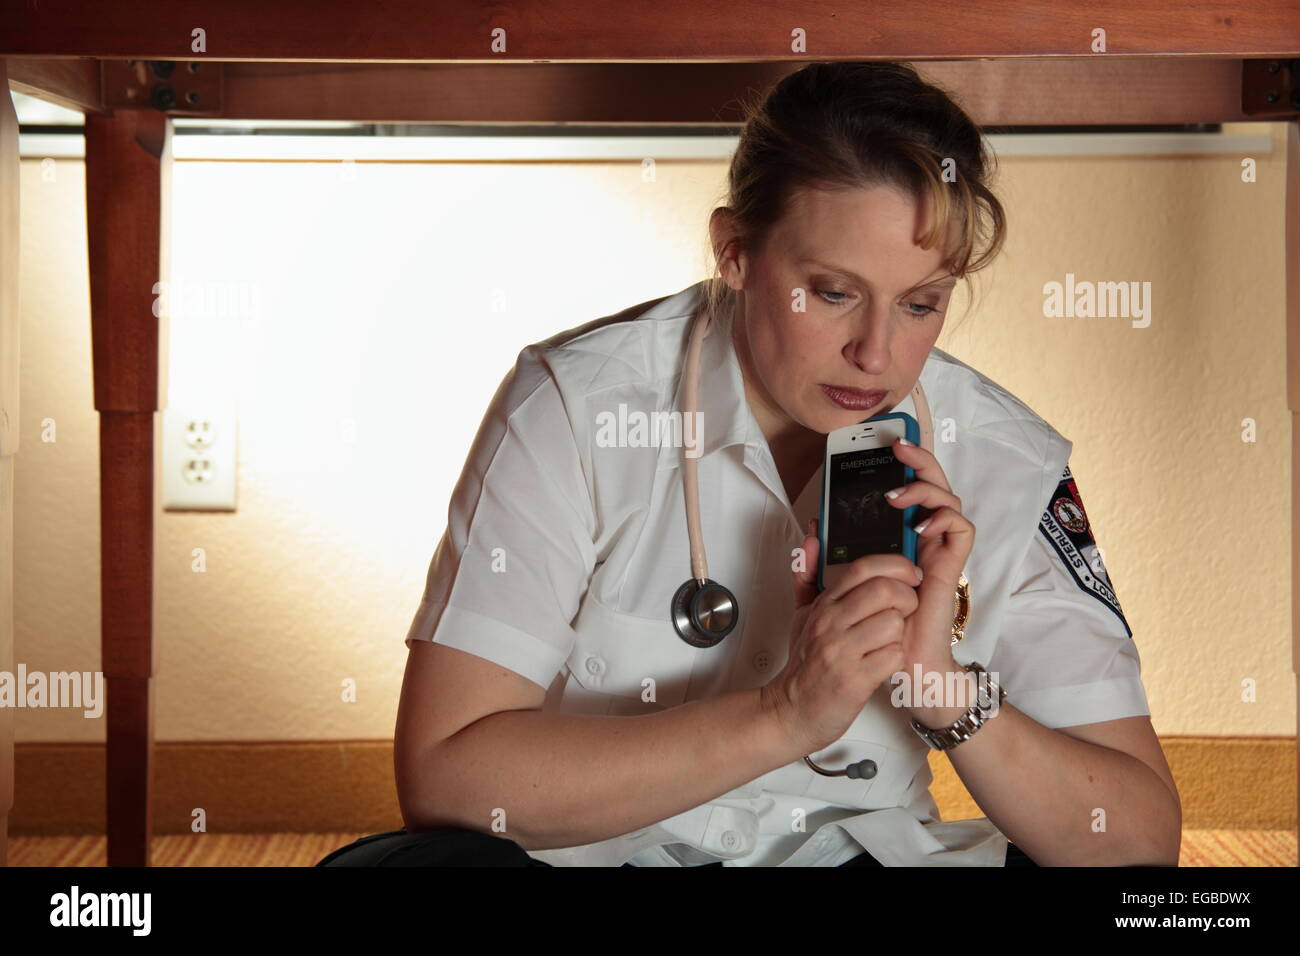 a stressed out EMT Stock Photo